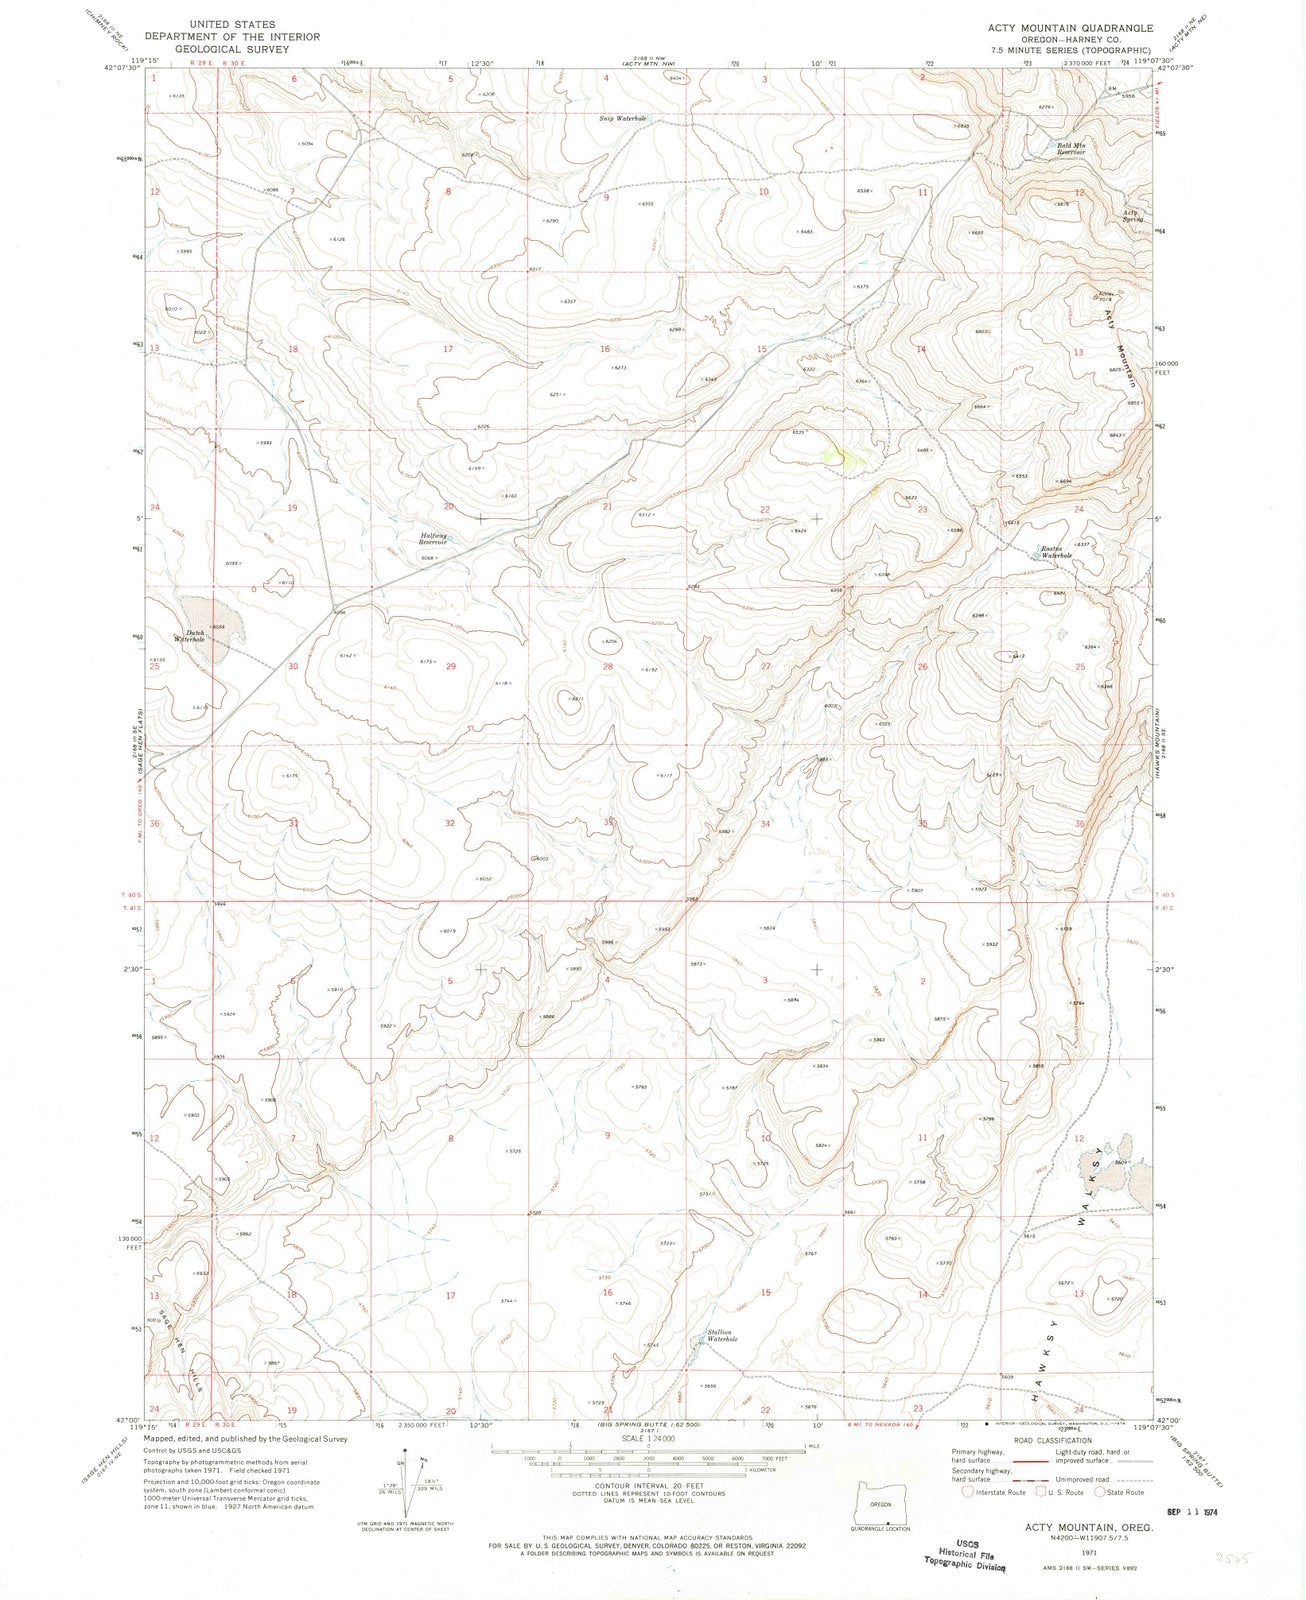 1971 Acty Mountain, OR - Oregon - USGS Topographic Map v3